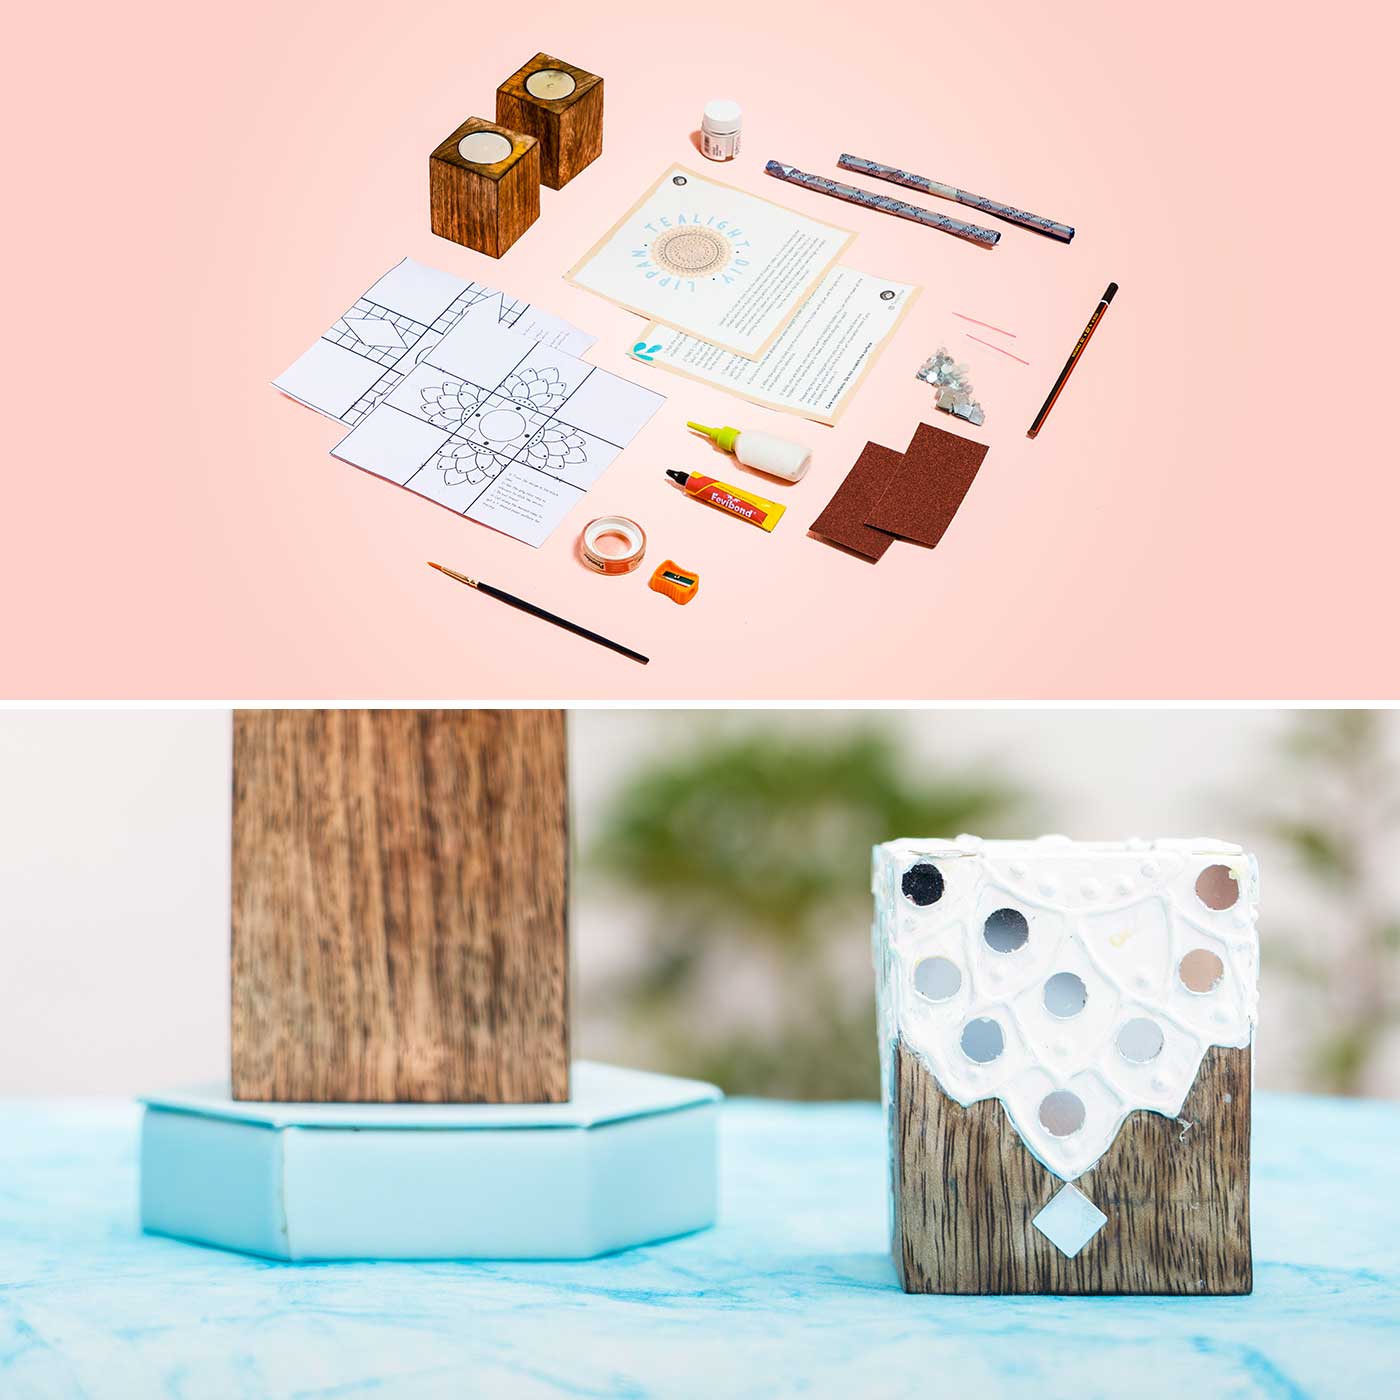 Lippan Art Material DIY Kit, A Kit With MDF Coaster Essal Stand